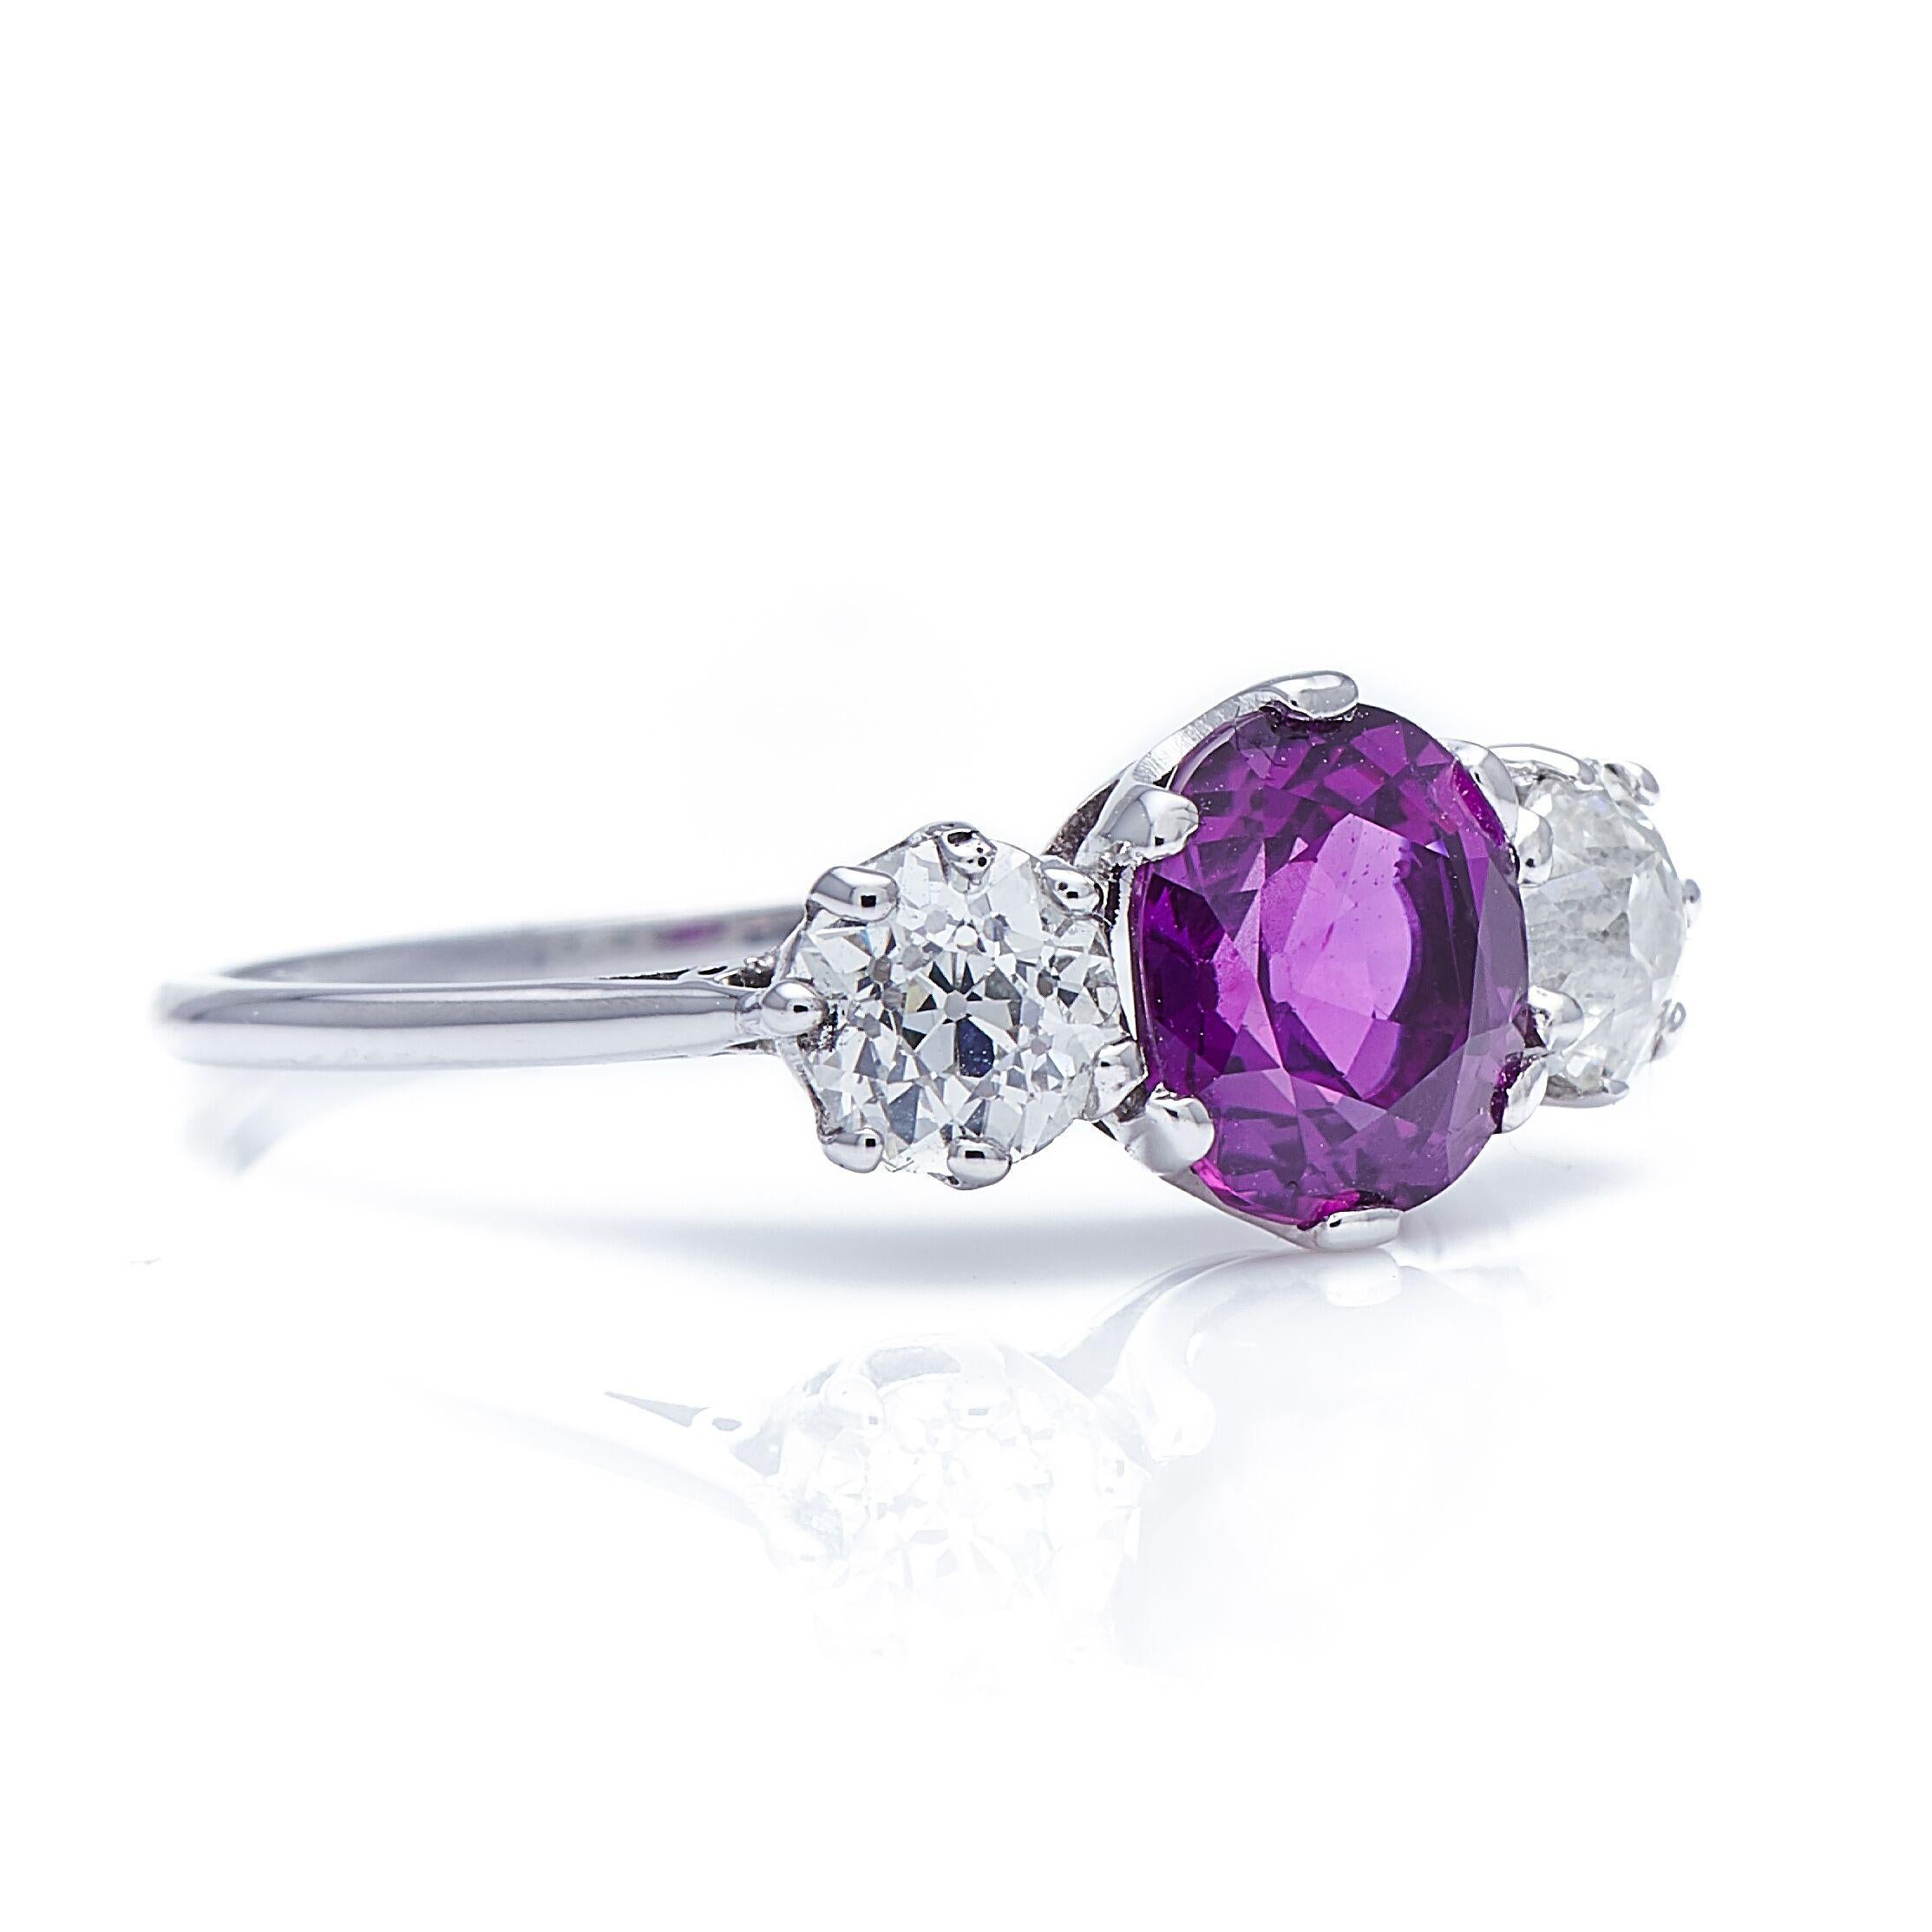 Purple sapphire and diamond ring, early 20th century. Sapphires are found in a rainbow of colours aside from the famous blue. The exception is red, when they’re known as rubies. This unusual sapphire is almost exactly halfway between a classic blue